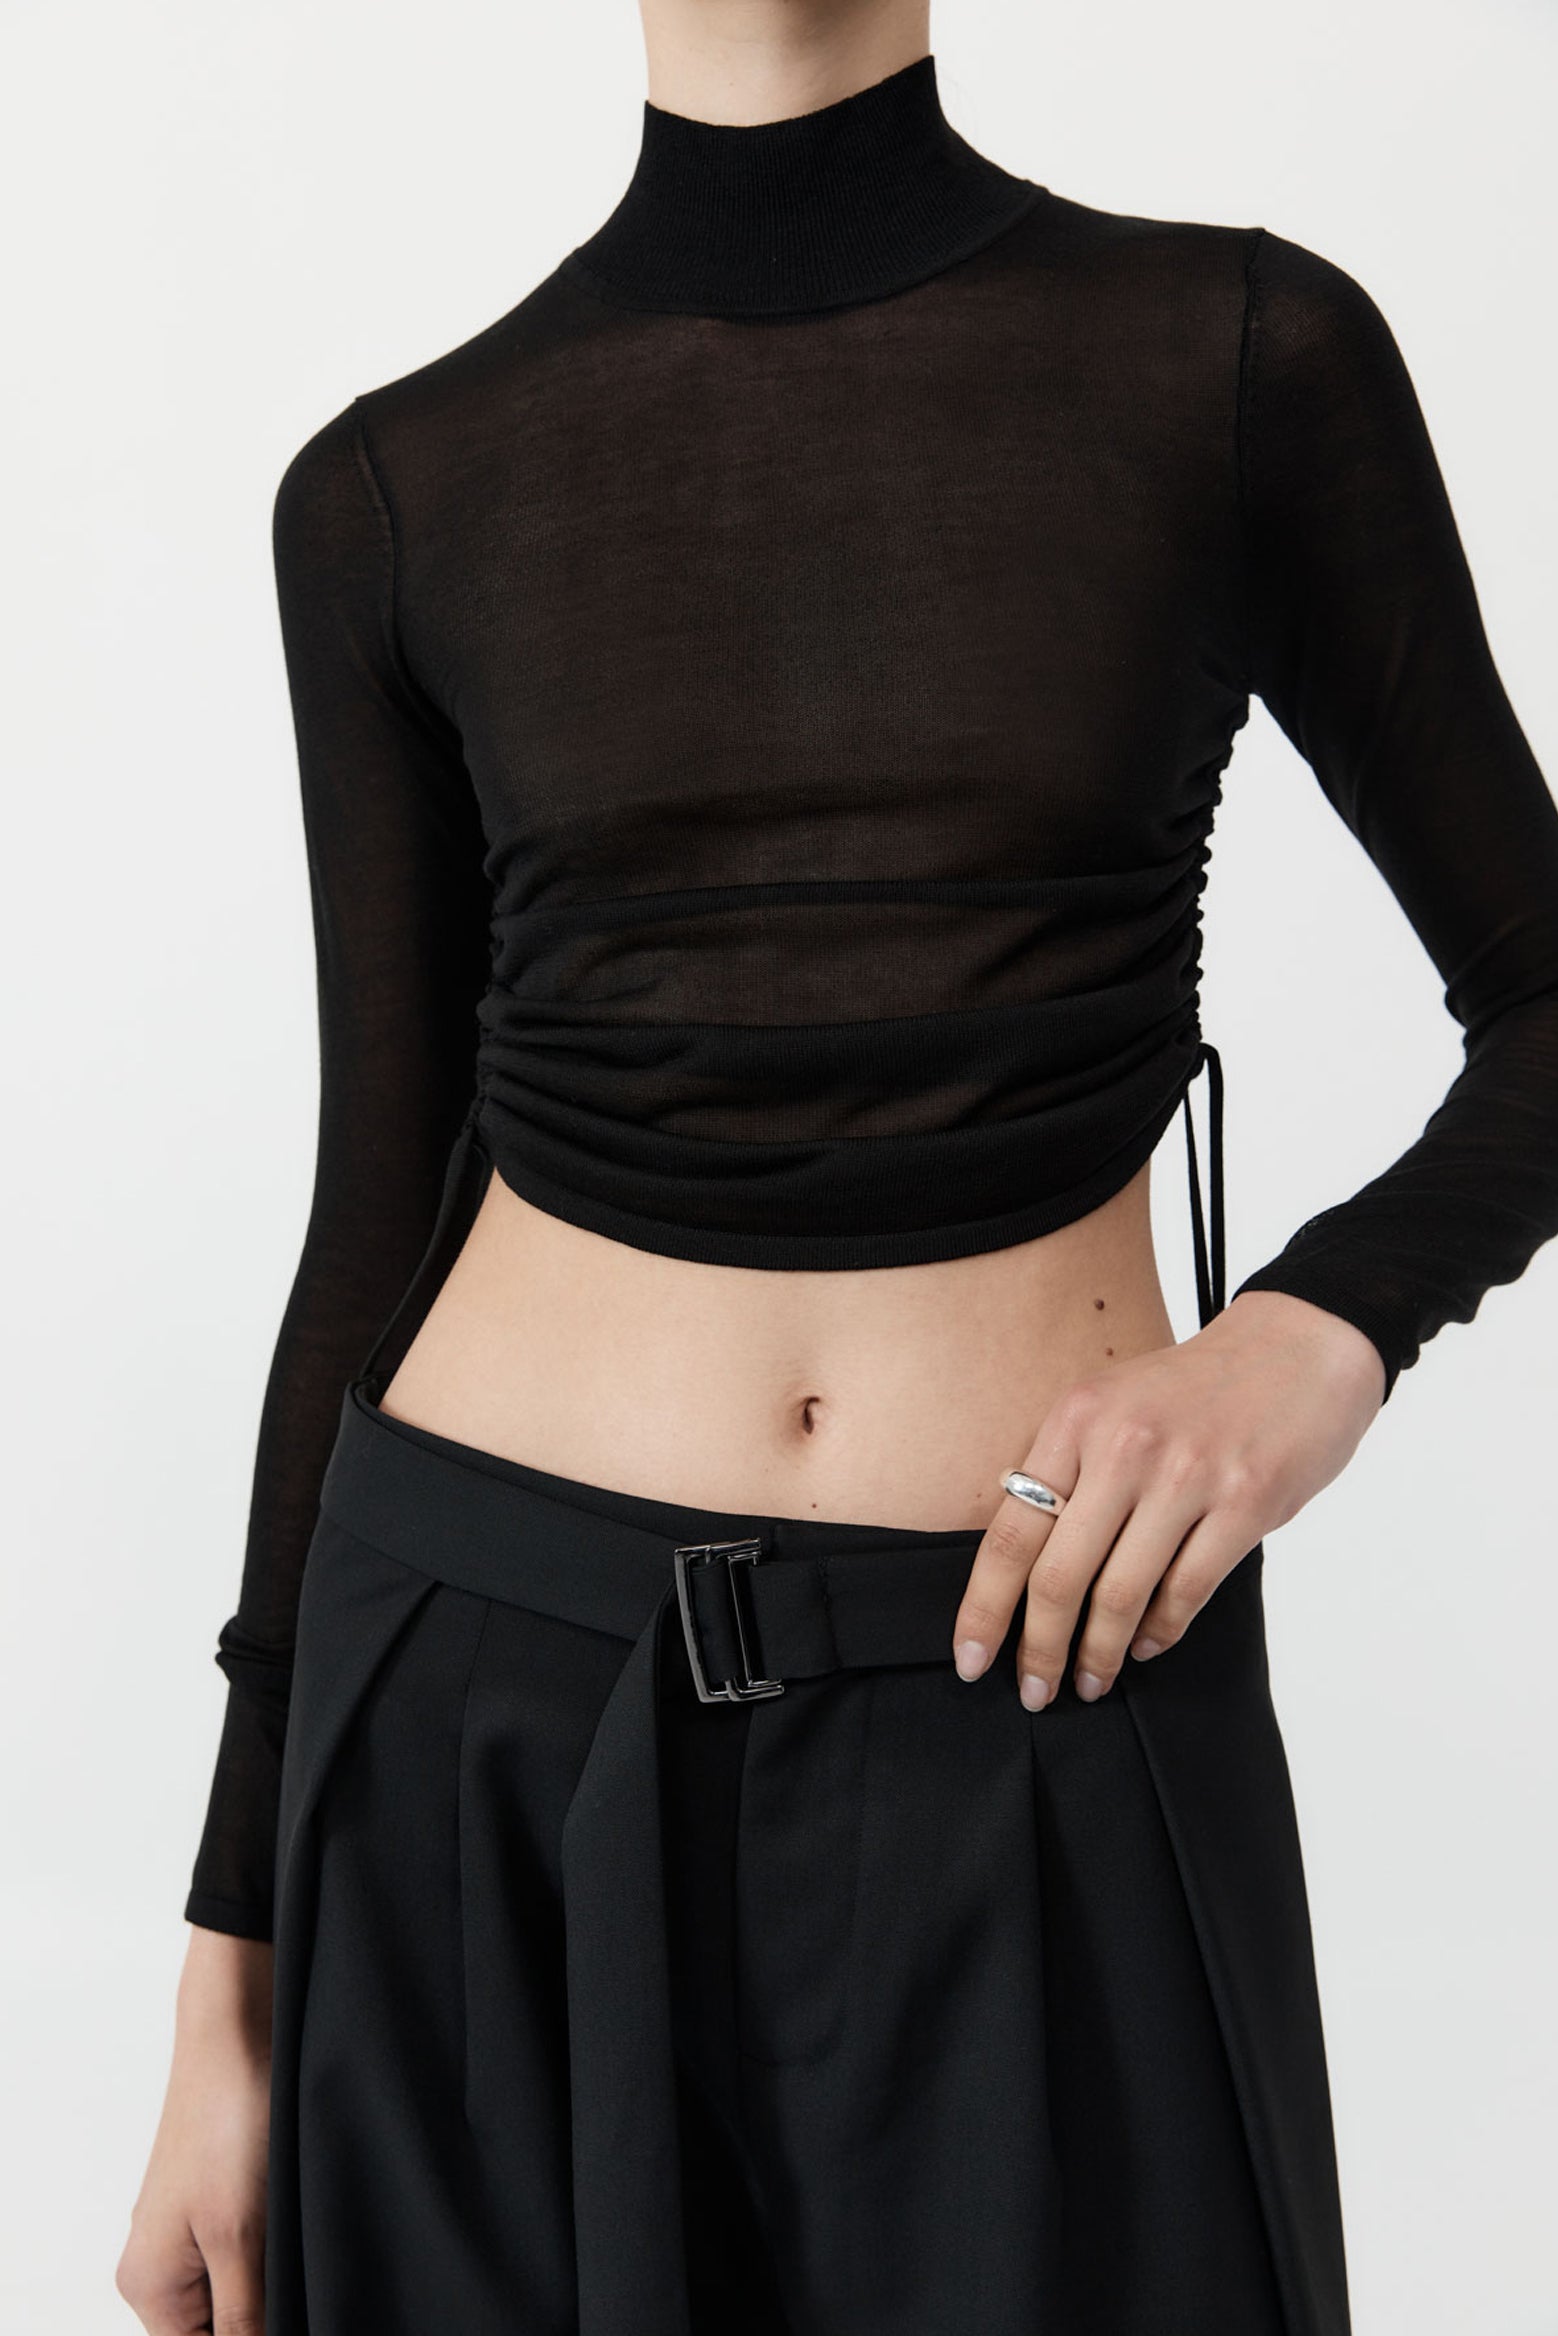 St Agni Sheer Ruched Top in Black available at The New Trend Australia.